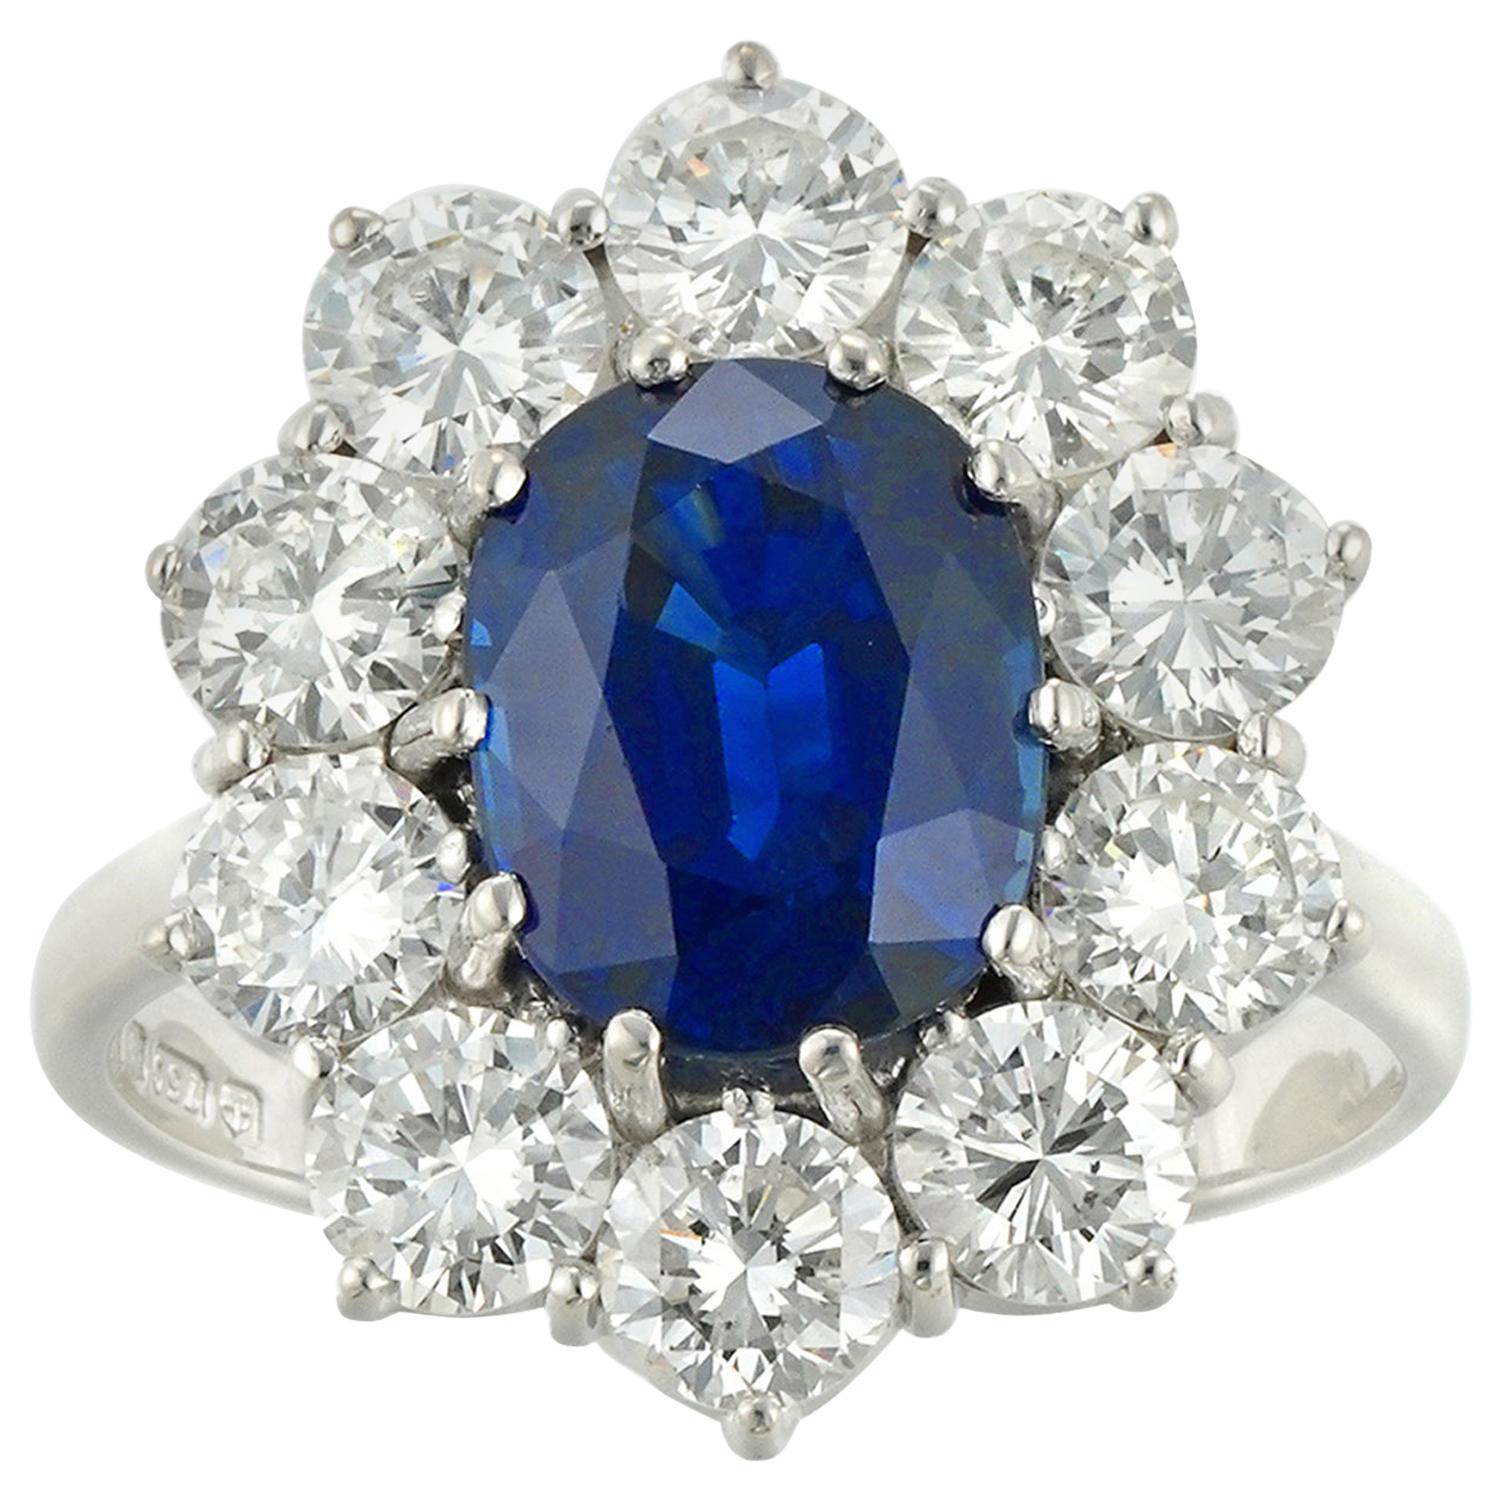 GCS Certified 3.74 Carat Oval Sapphire and Diamond Cluster Ring